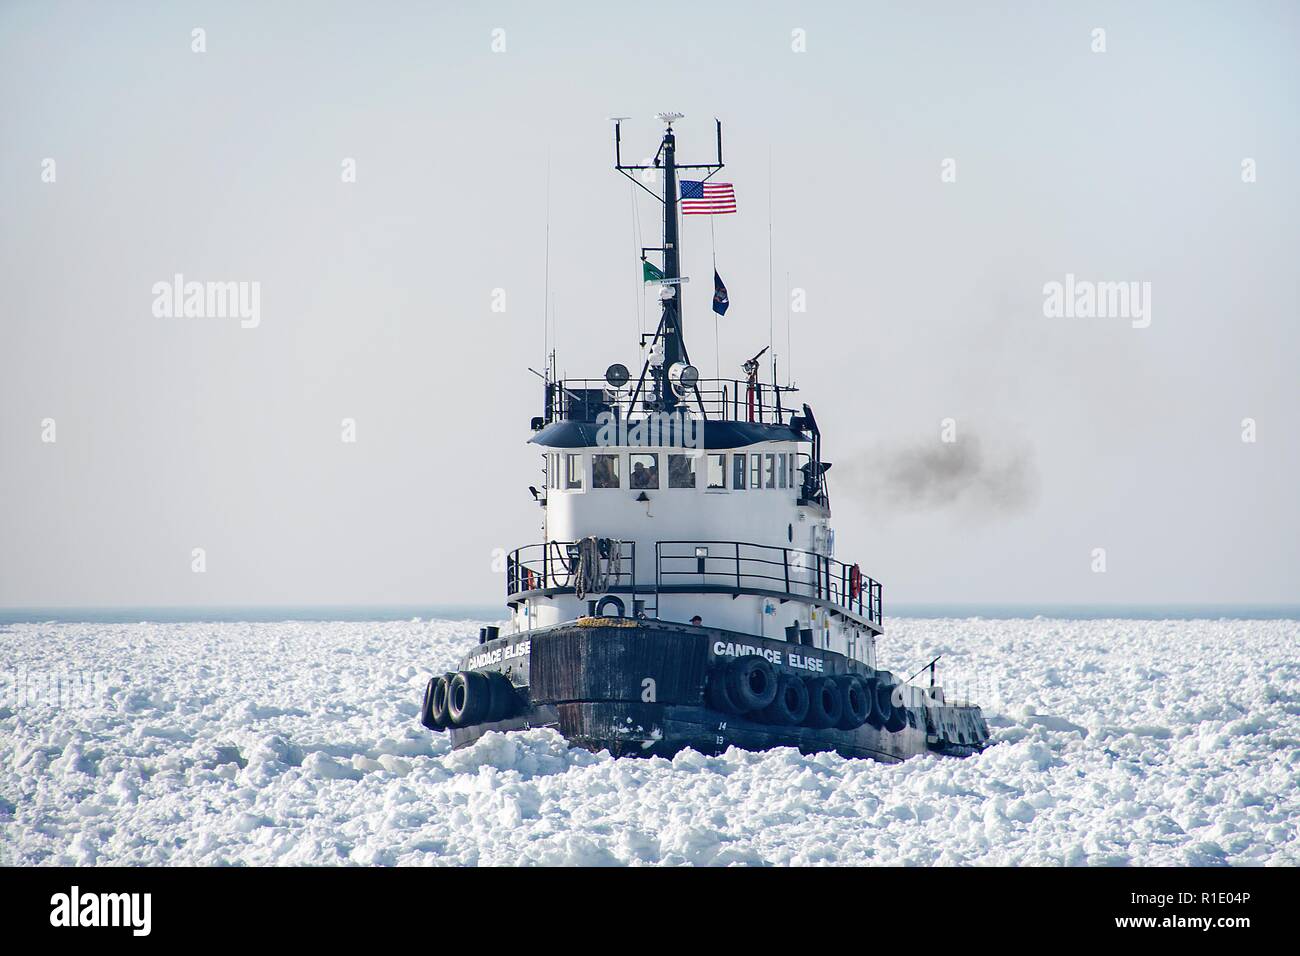 Candace Elise tugboat in gefrorenen See Michigan Hafen in Holland, Michigan Stockfoto